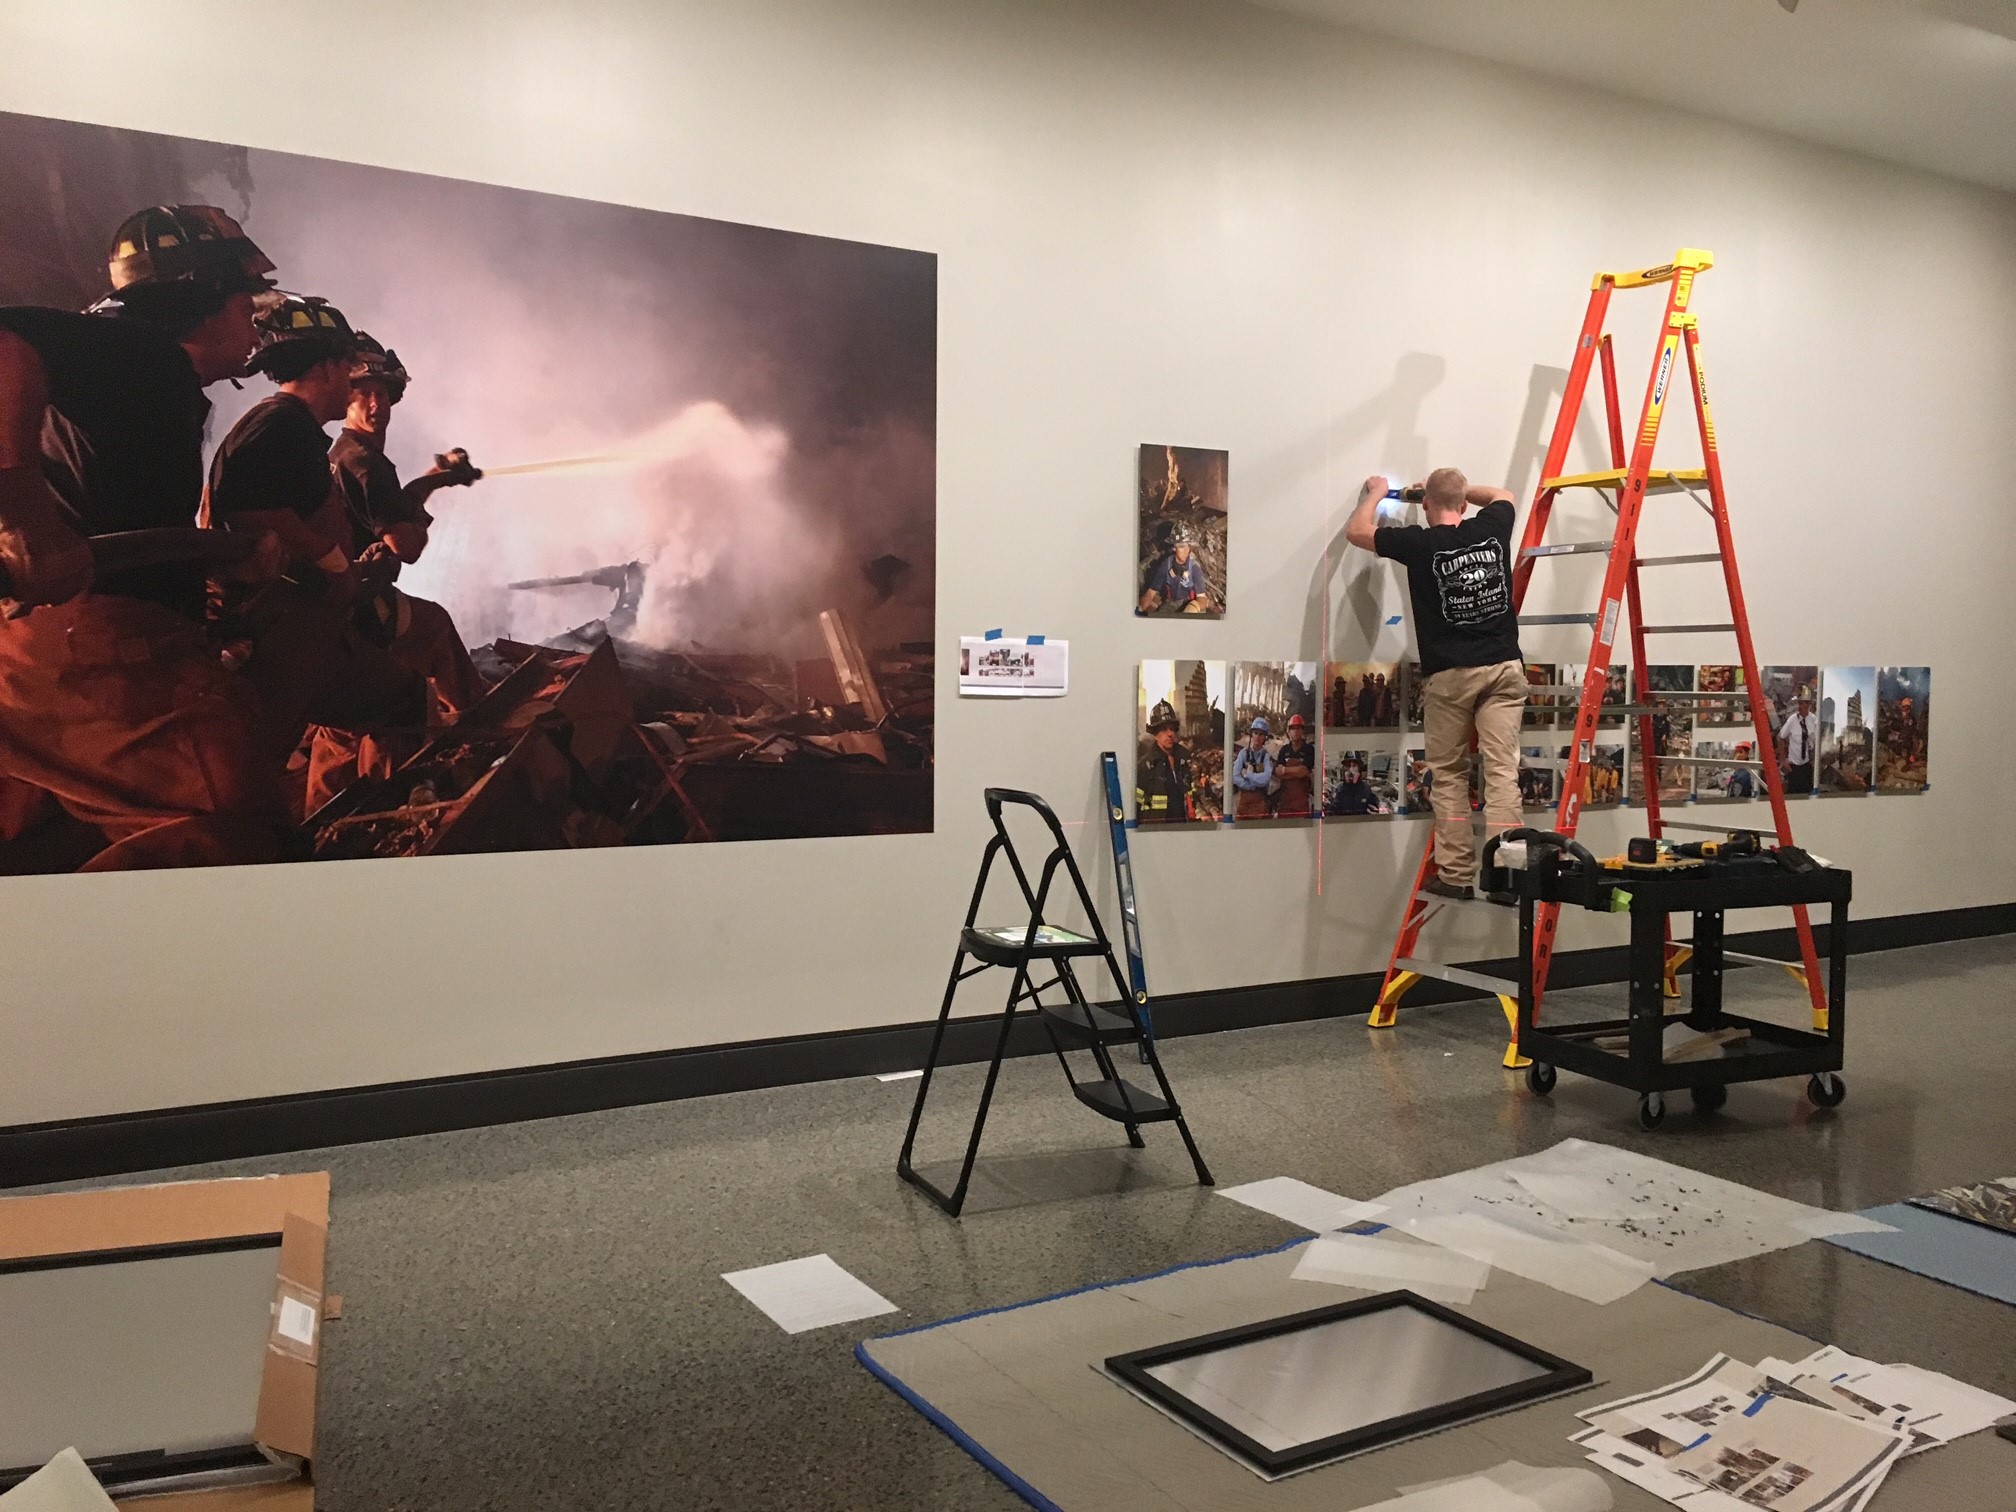 A man stands on an orange ladder as he installs the exhibition “Hope at Ground Zero.” About a dozen FEMA photographs of Ground Zero have been positioned on a white wall in front of the man.